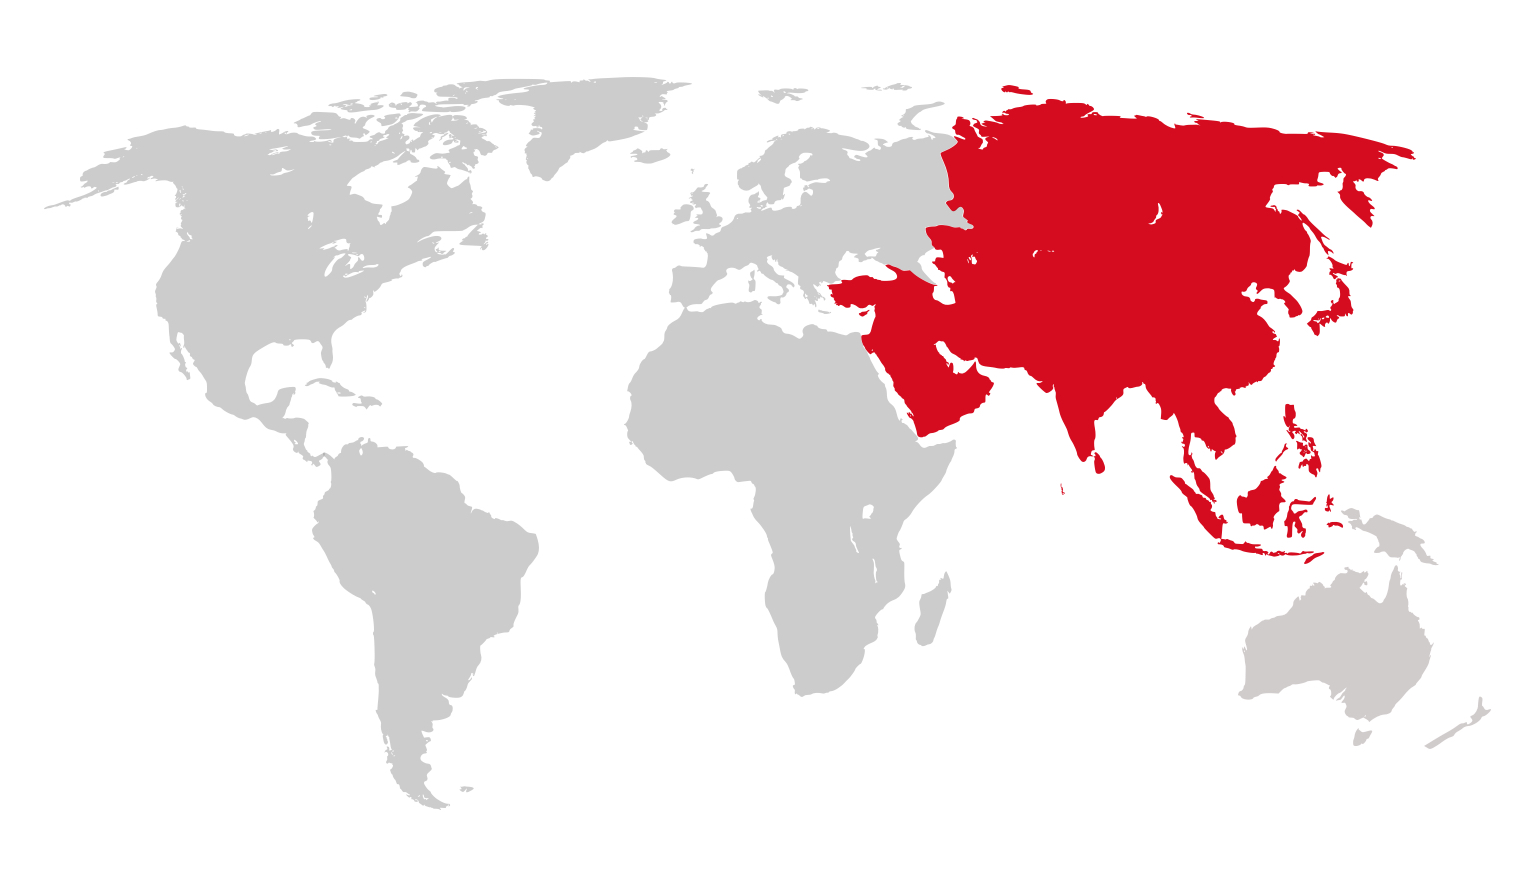 World map with Asia highlighted